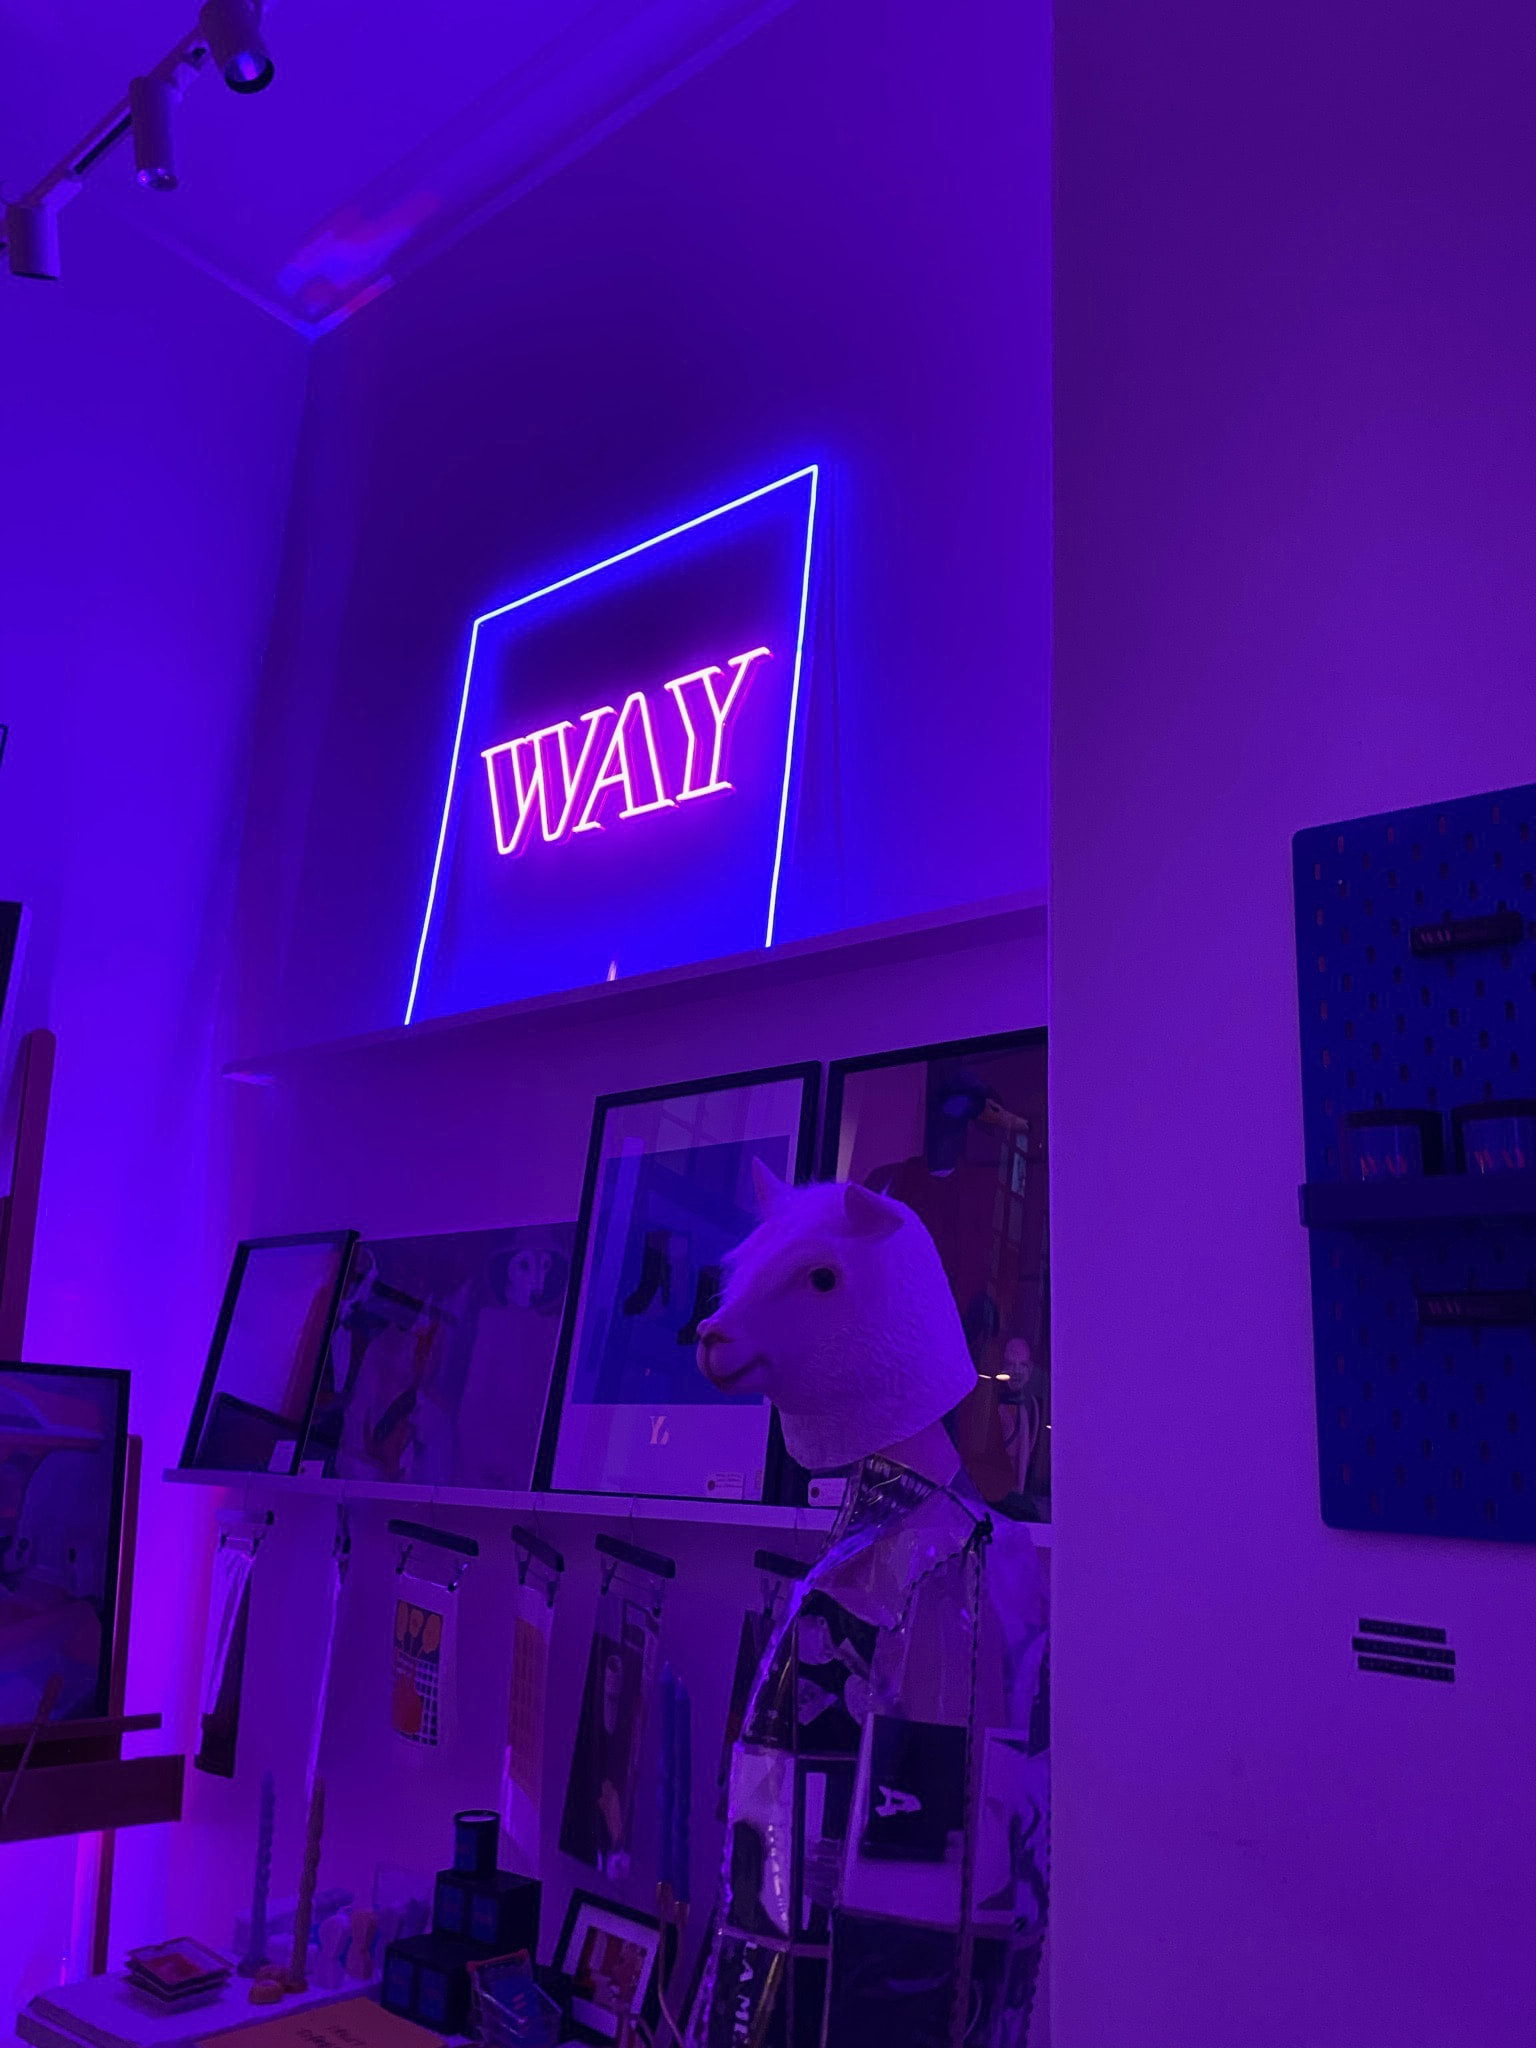 WAY – Photo from WAY gallery Sthlm by Francesca B. (16/08/2021)